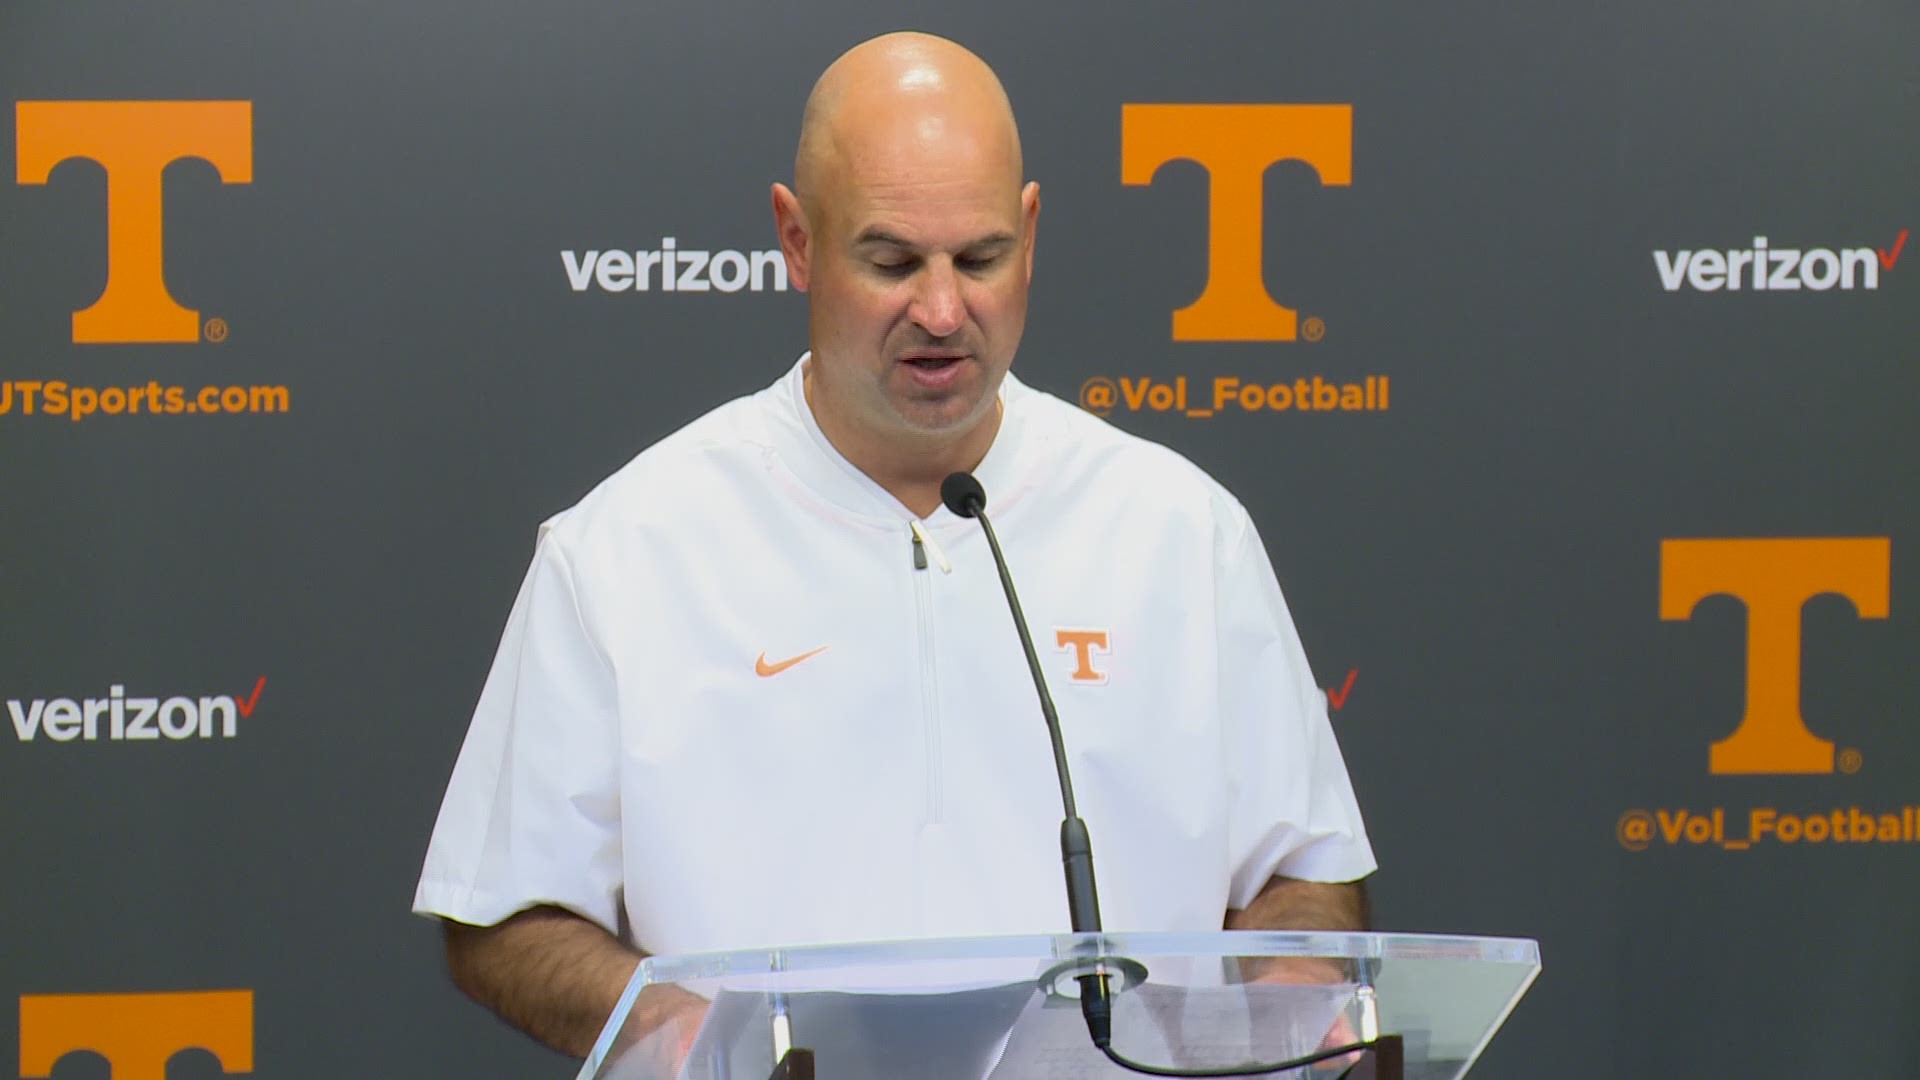 Jeremy Pruitt speaks candidly about the game against Alabama being too big for some of his players.